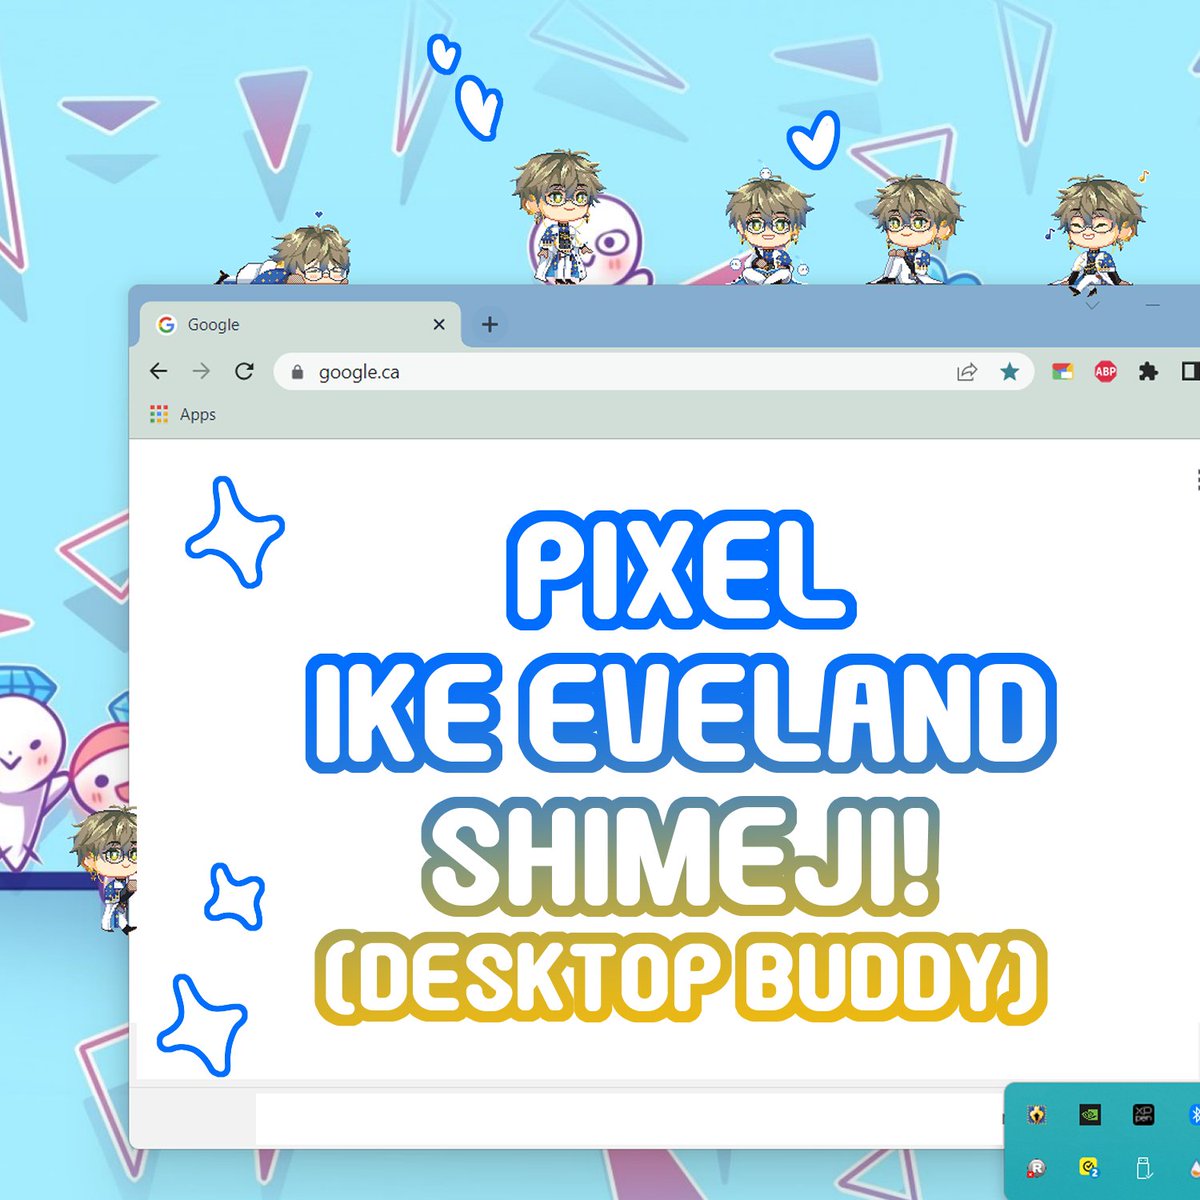 💙PIXEL IKE EVELAND SHIMEJI💙
Hoping this works! But happy birthday and a gift for quilldren too!💙
#IkeyBirthday2023 #IkeEveland #Ikenograghy 
drive.google.com/drive/folders/…